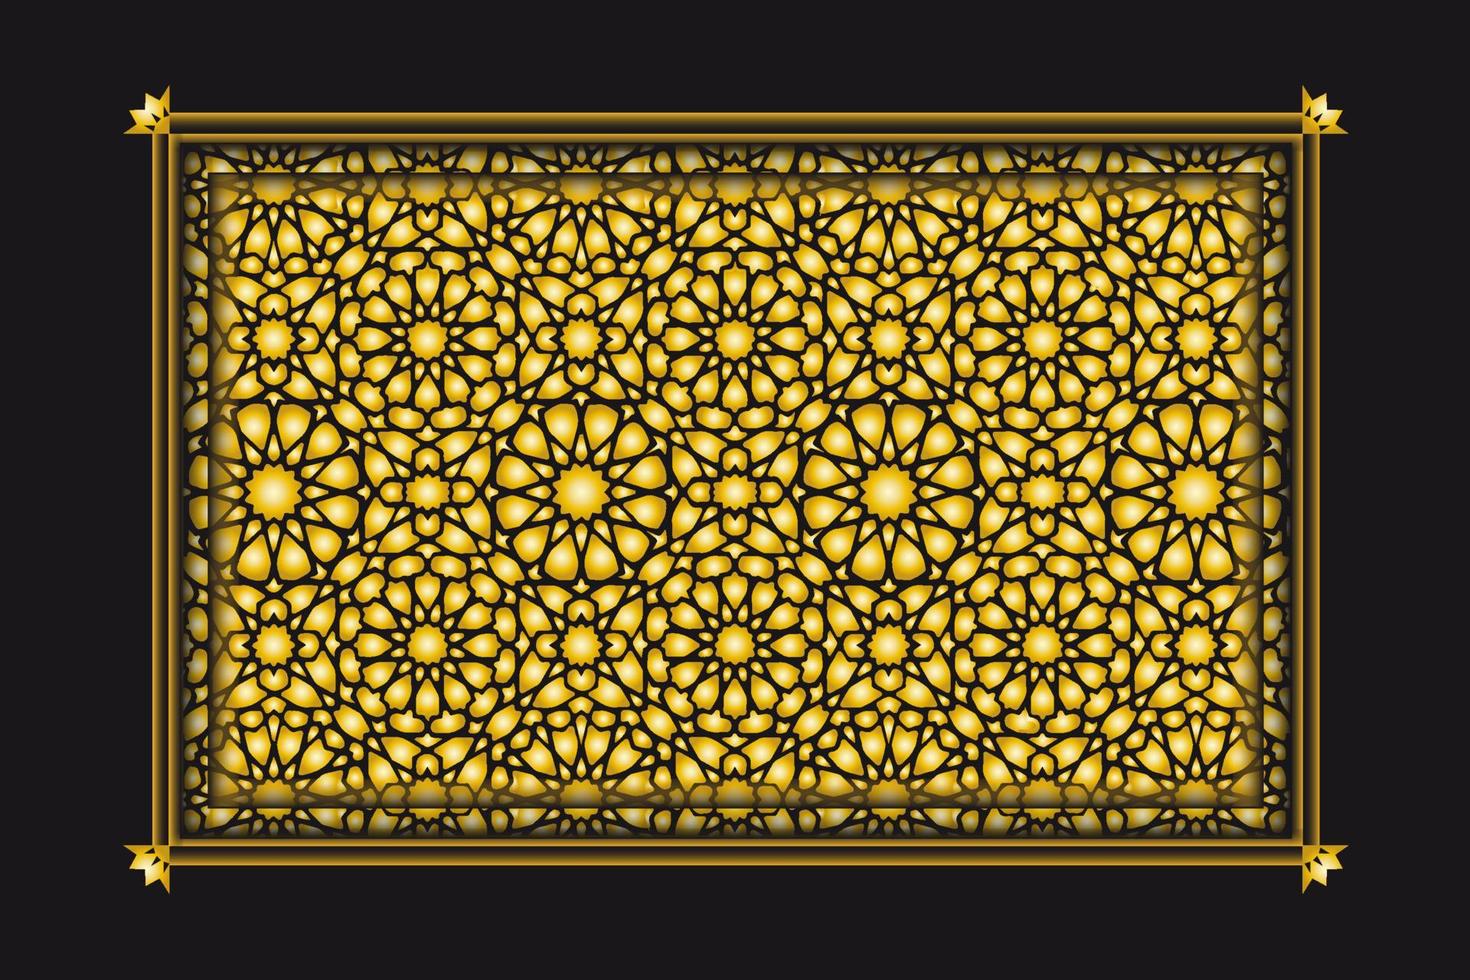 Arabesque golden pattern background collection, Gold Luxury background islamic ornament vector image